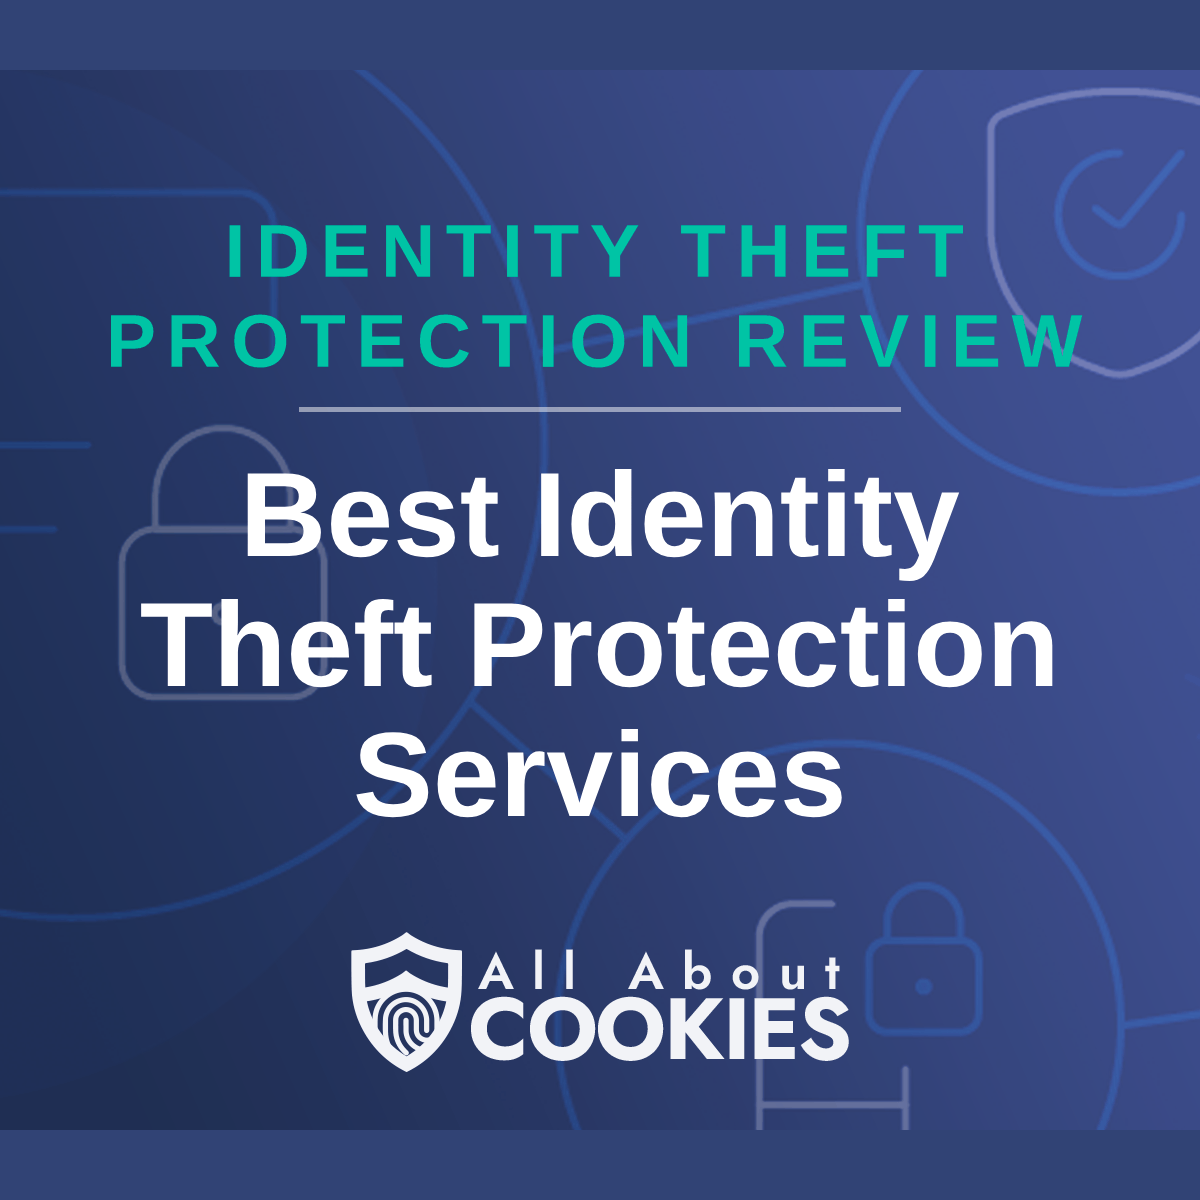 A blue background with images of locks and shields with the text &quot;Best Identity Theft Protection Services&quot; and the All About Cookies logo. 